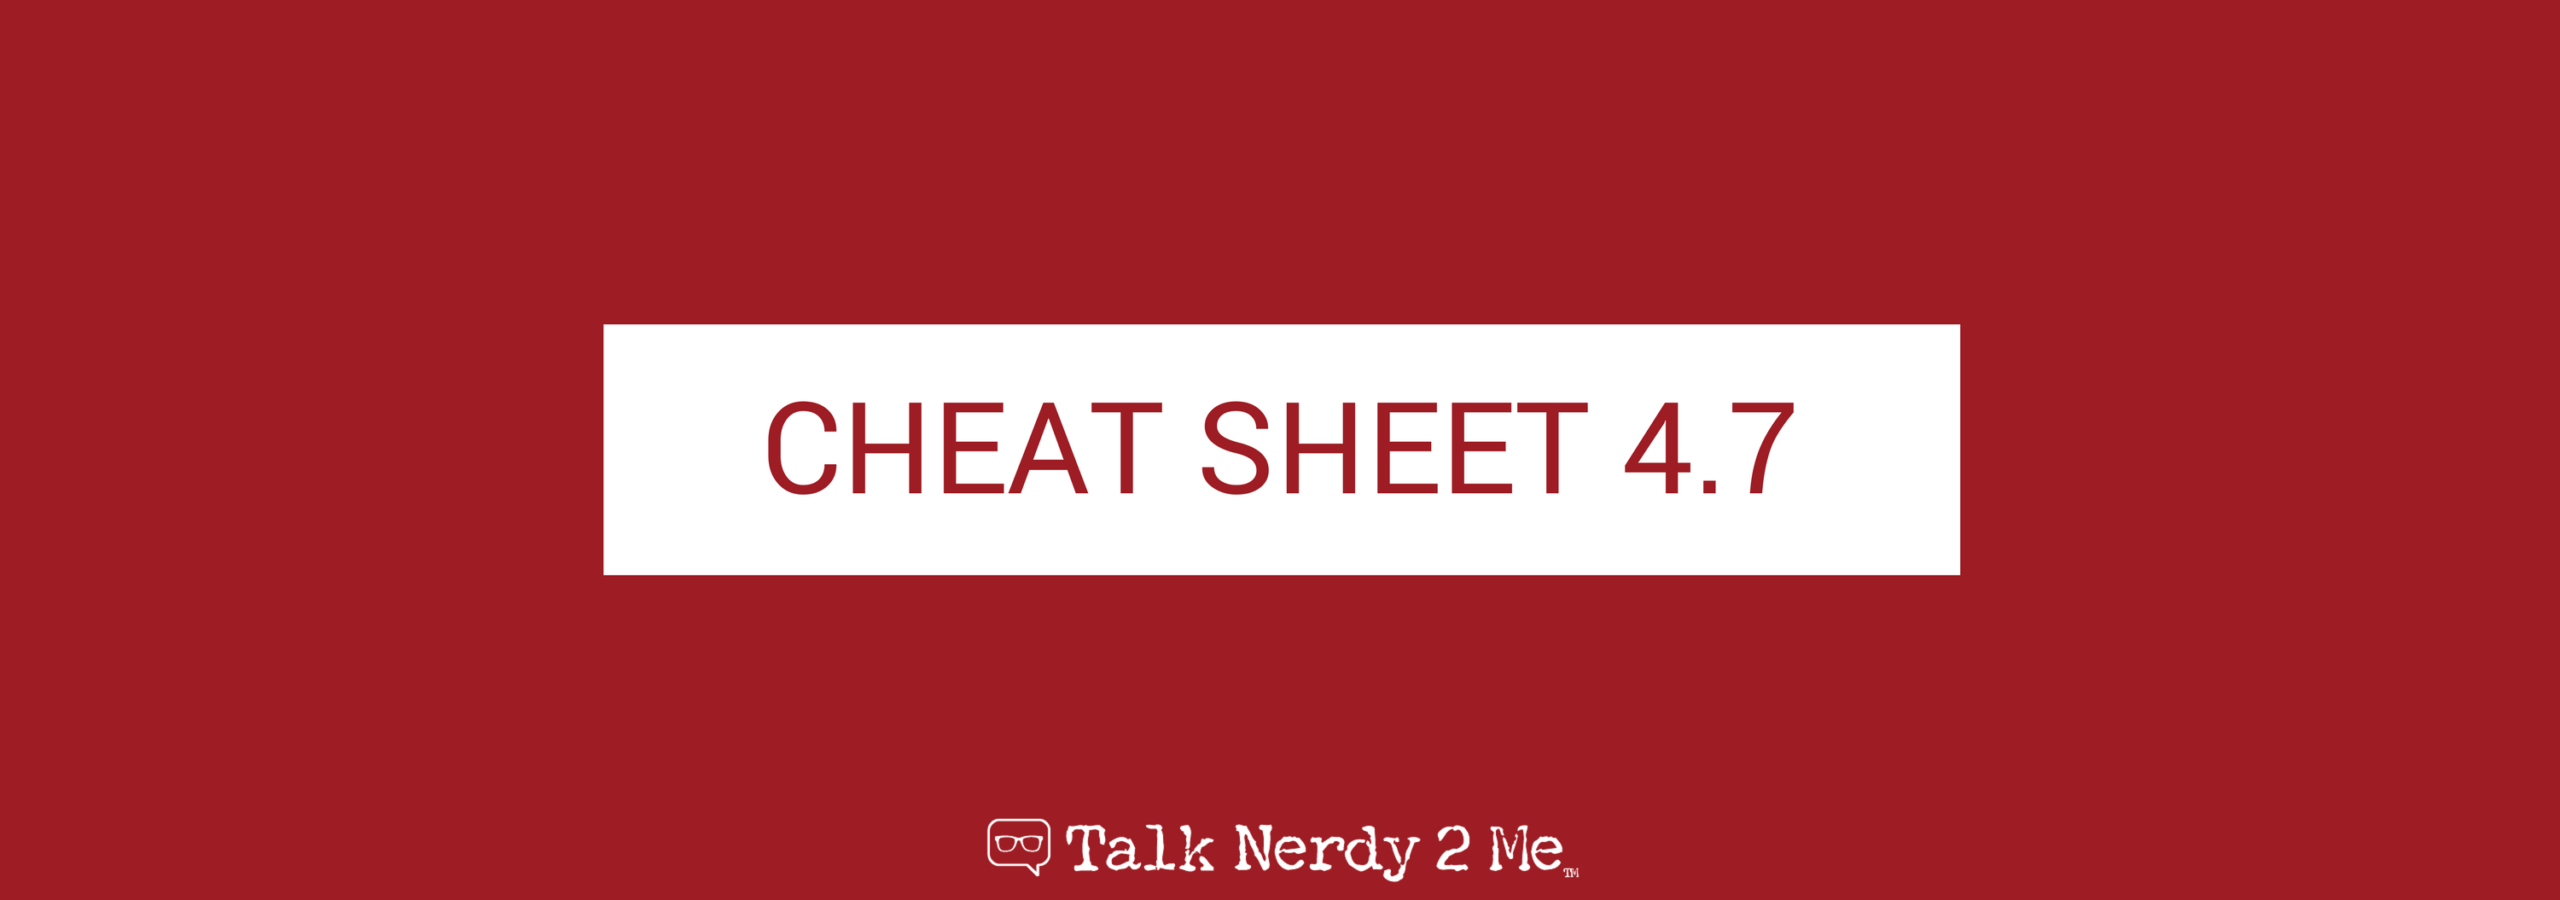 Cheat Sheet for 4.7